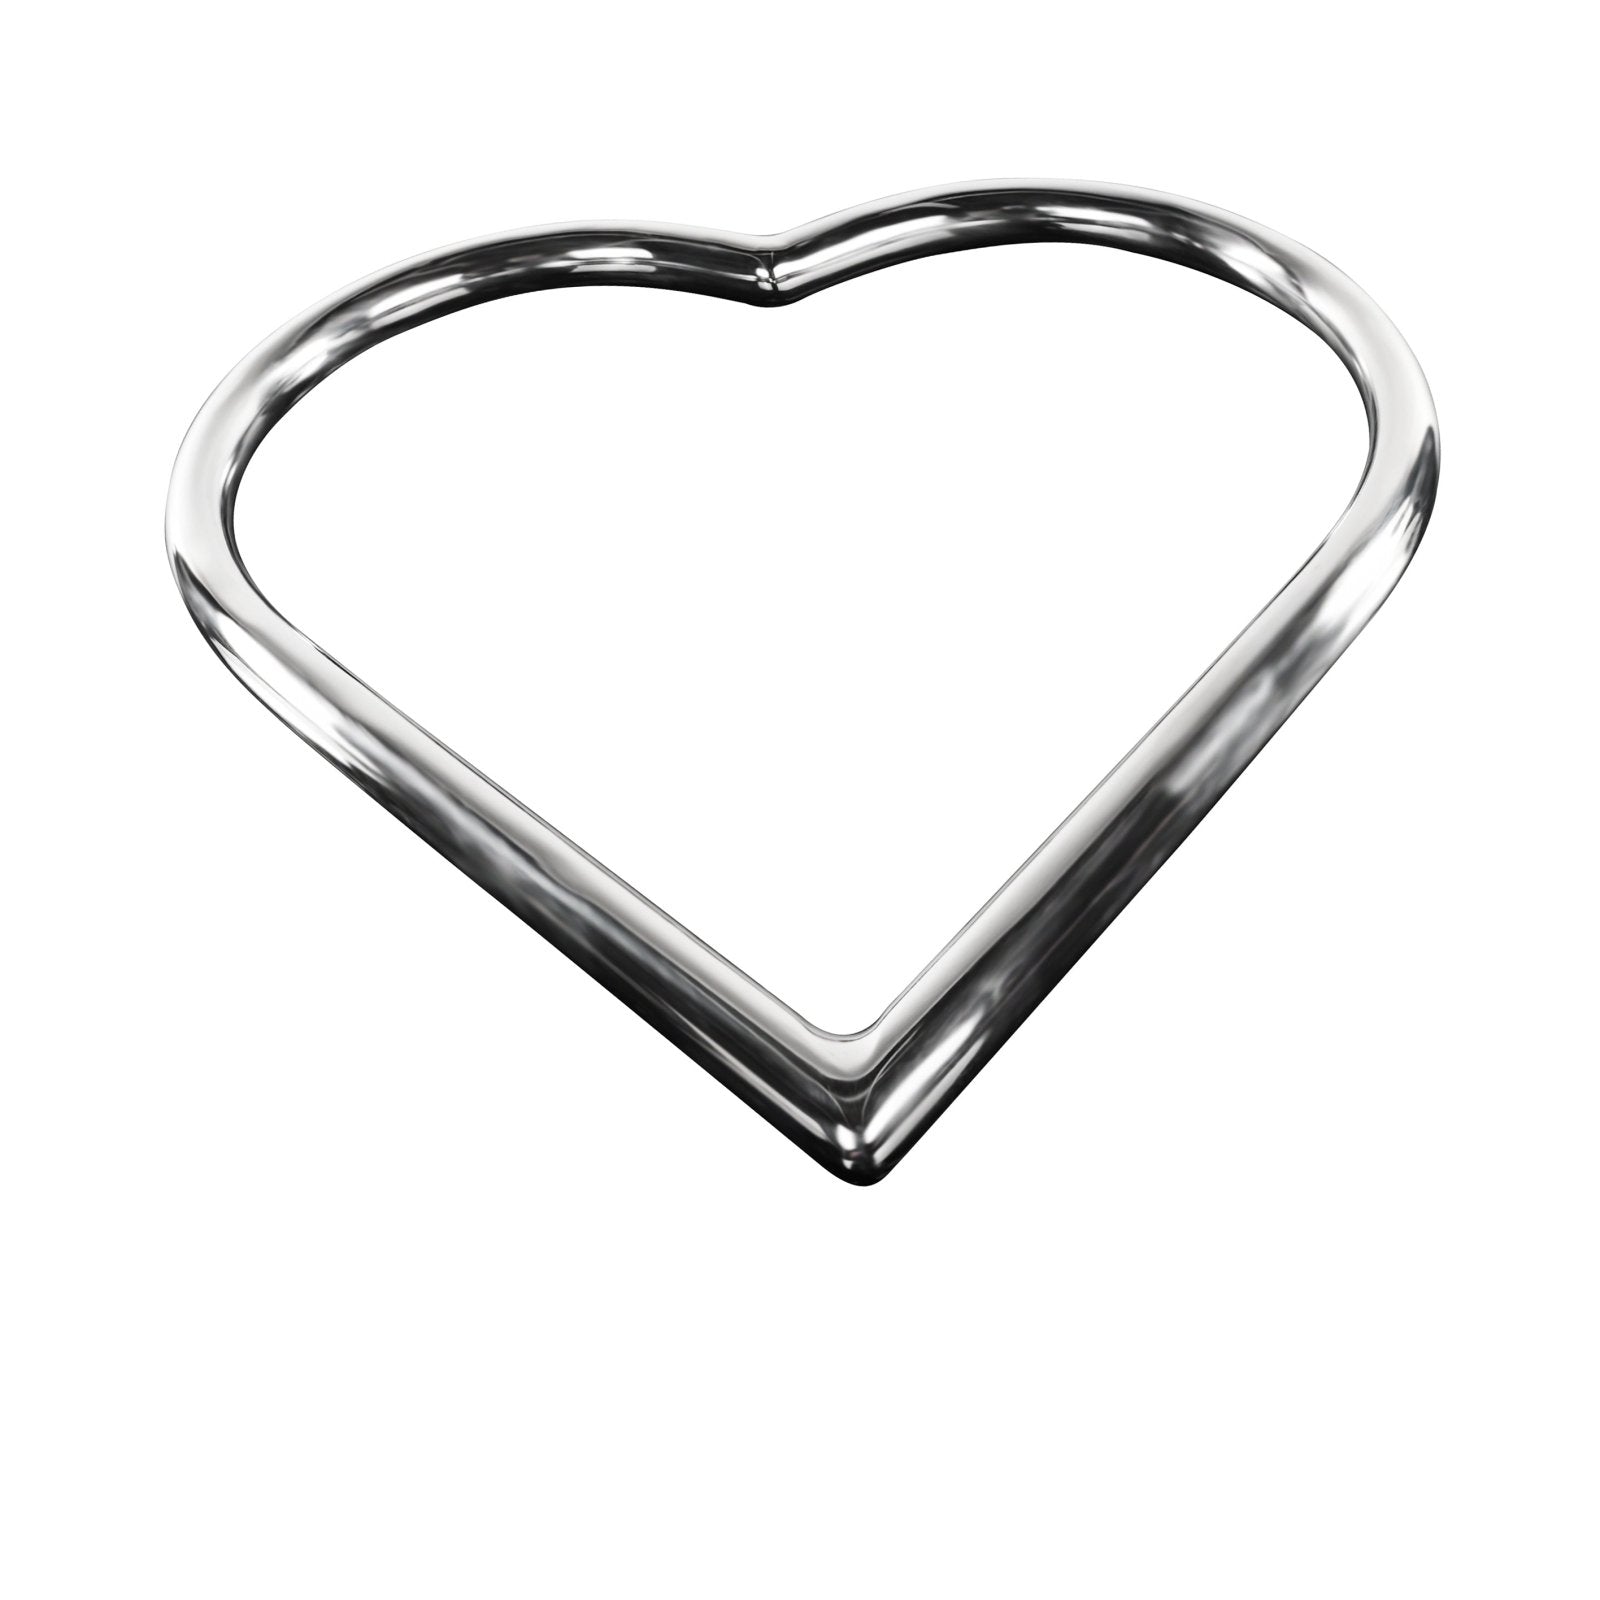 Core By Kink Heart Shaped Deluxe Shibari Ring - Kink Store